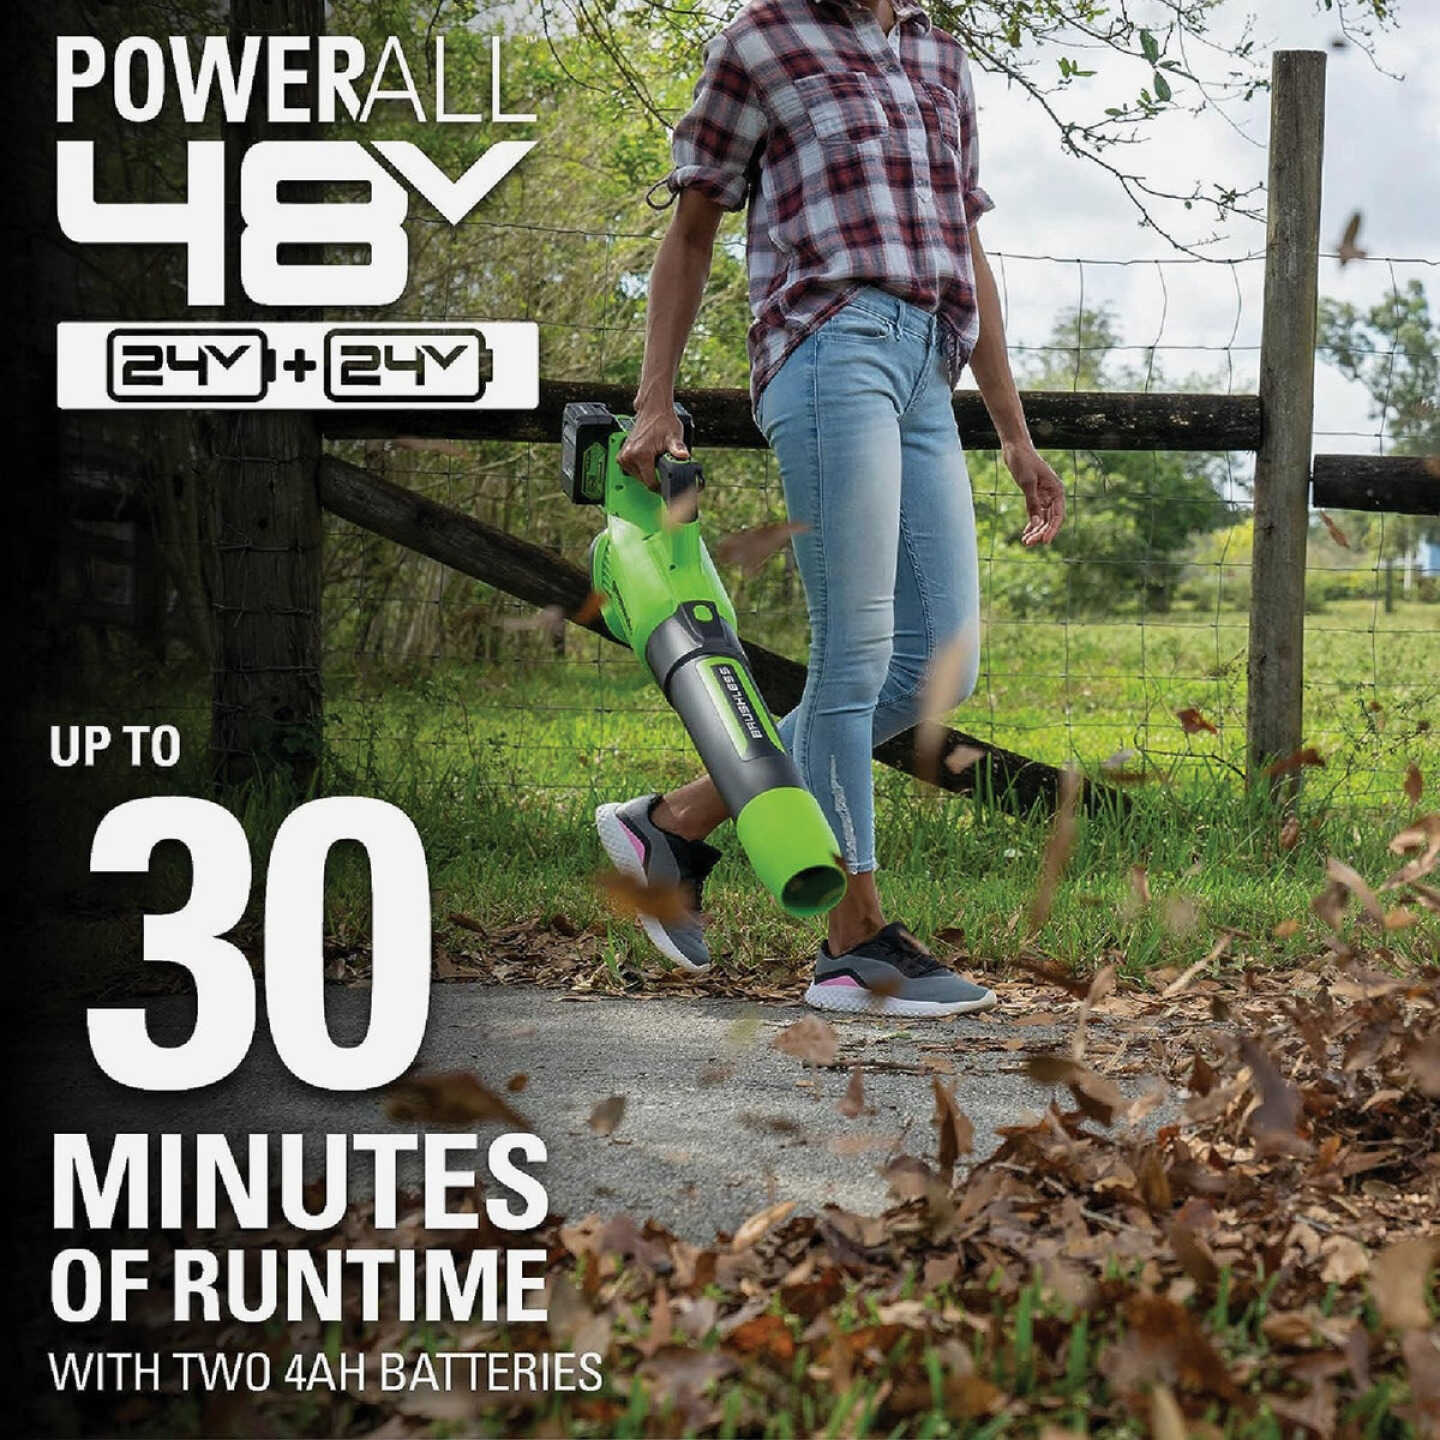 Cordless 20V Brushless Leaf Blower with 4.0Ah Battery and Fast Charger